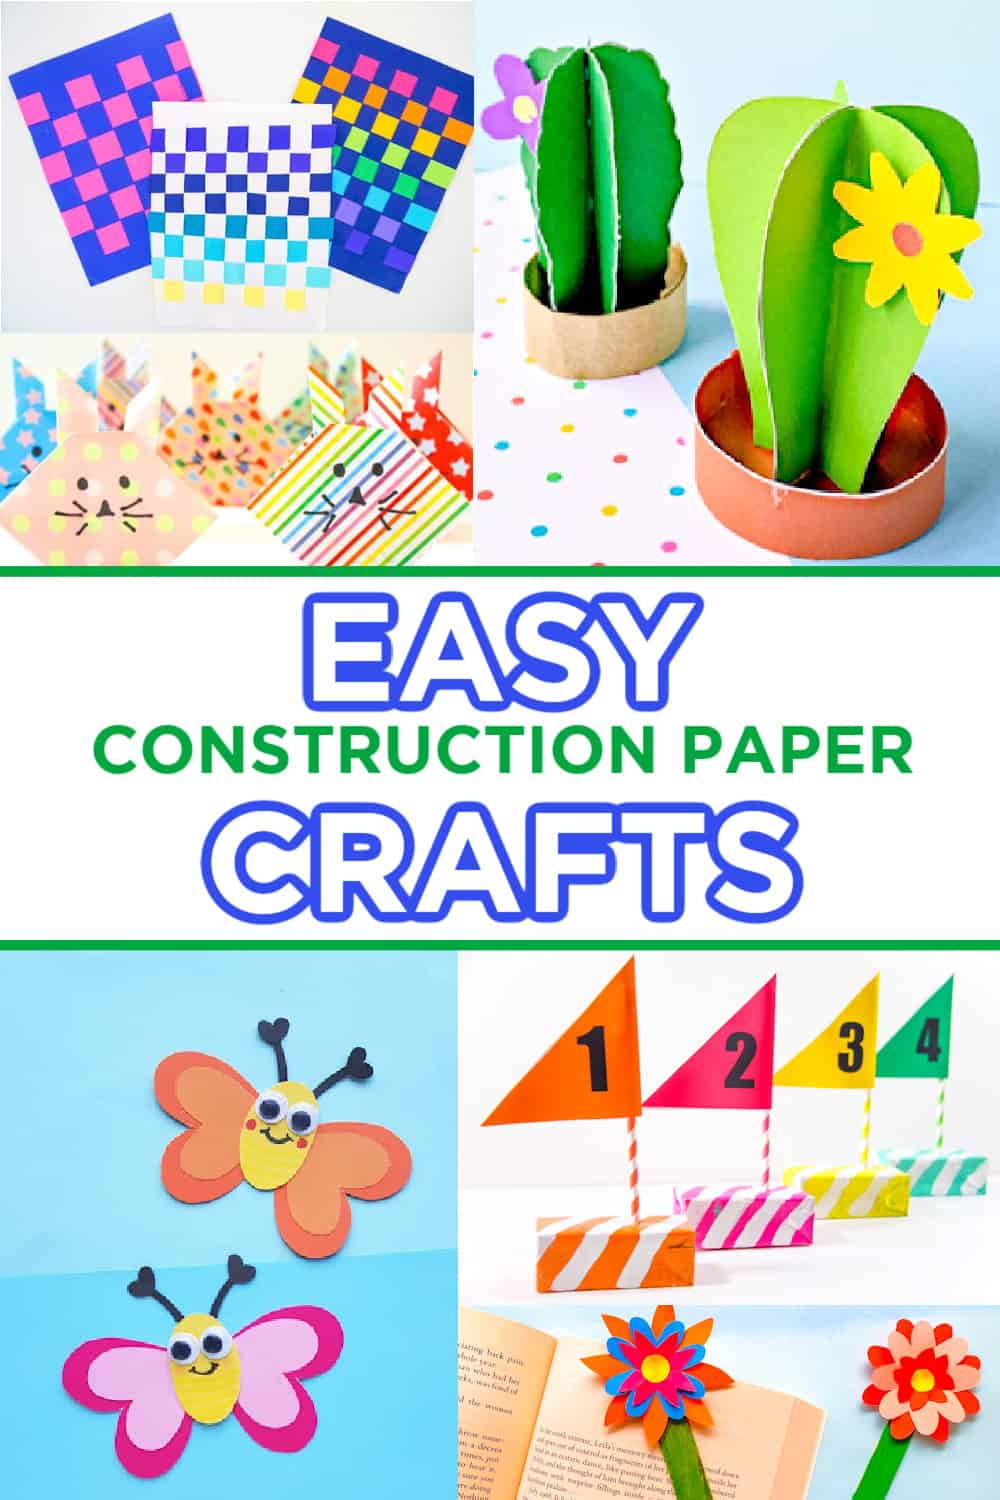 Construction Paper Crafts For kids